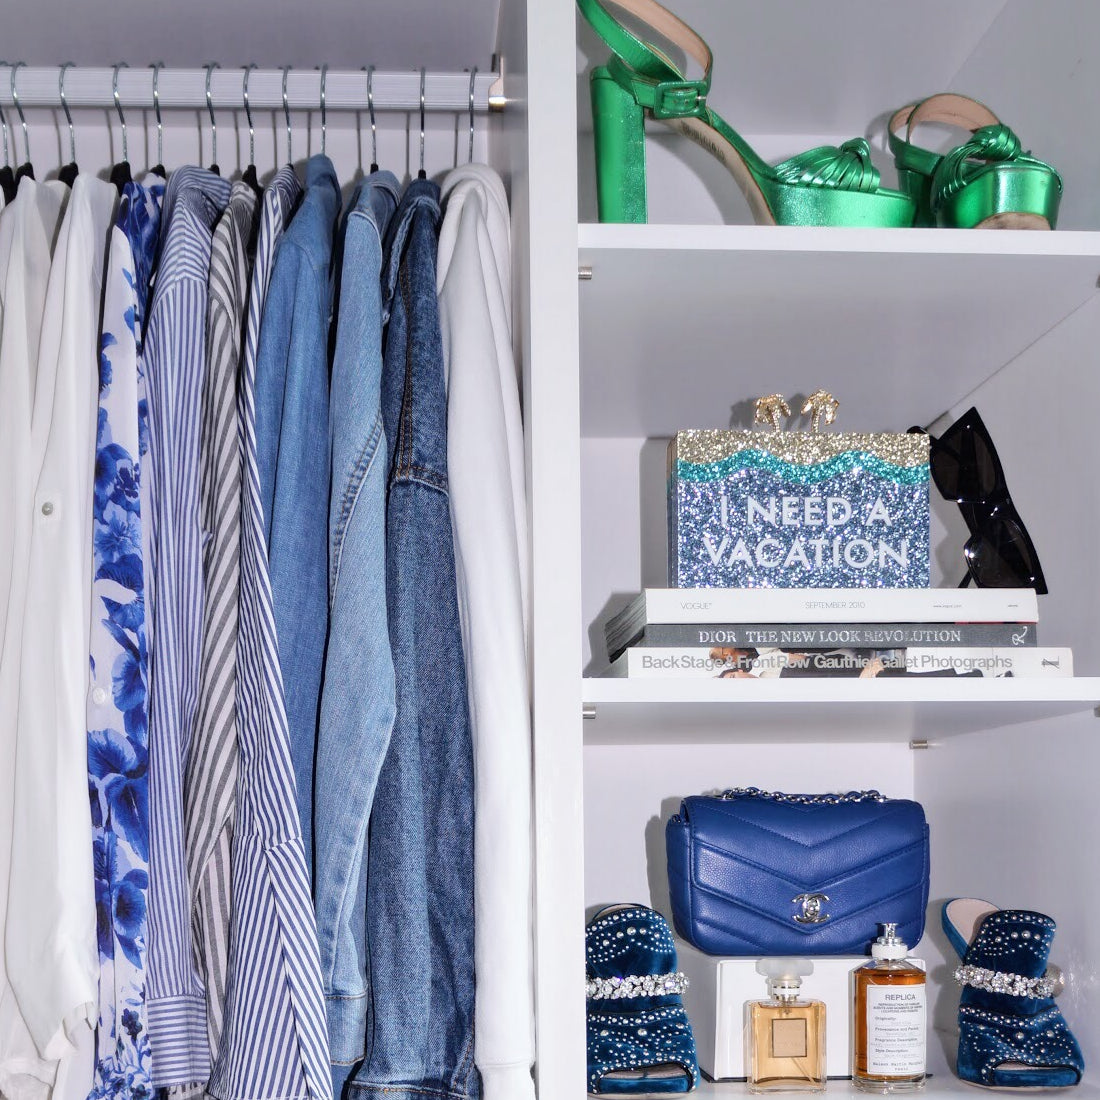 organise: 5 space saving essentials for your wardrobe